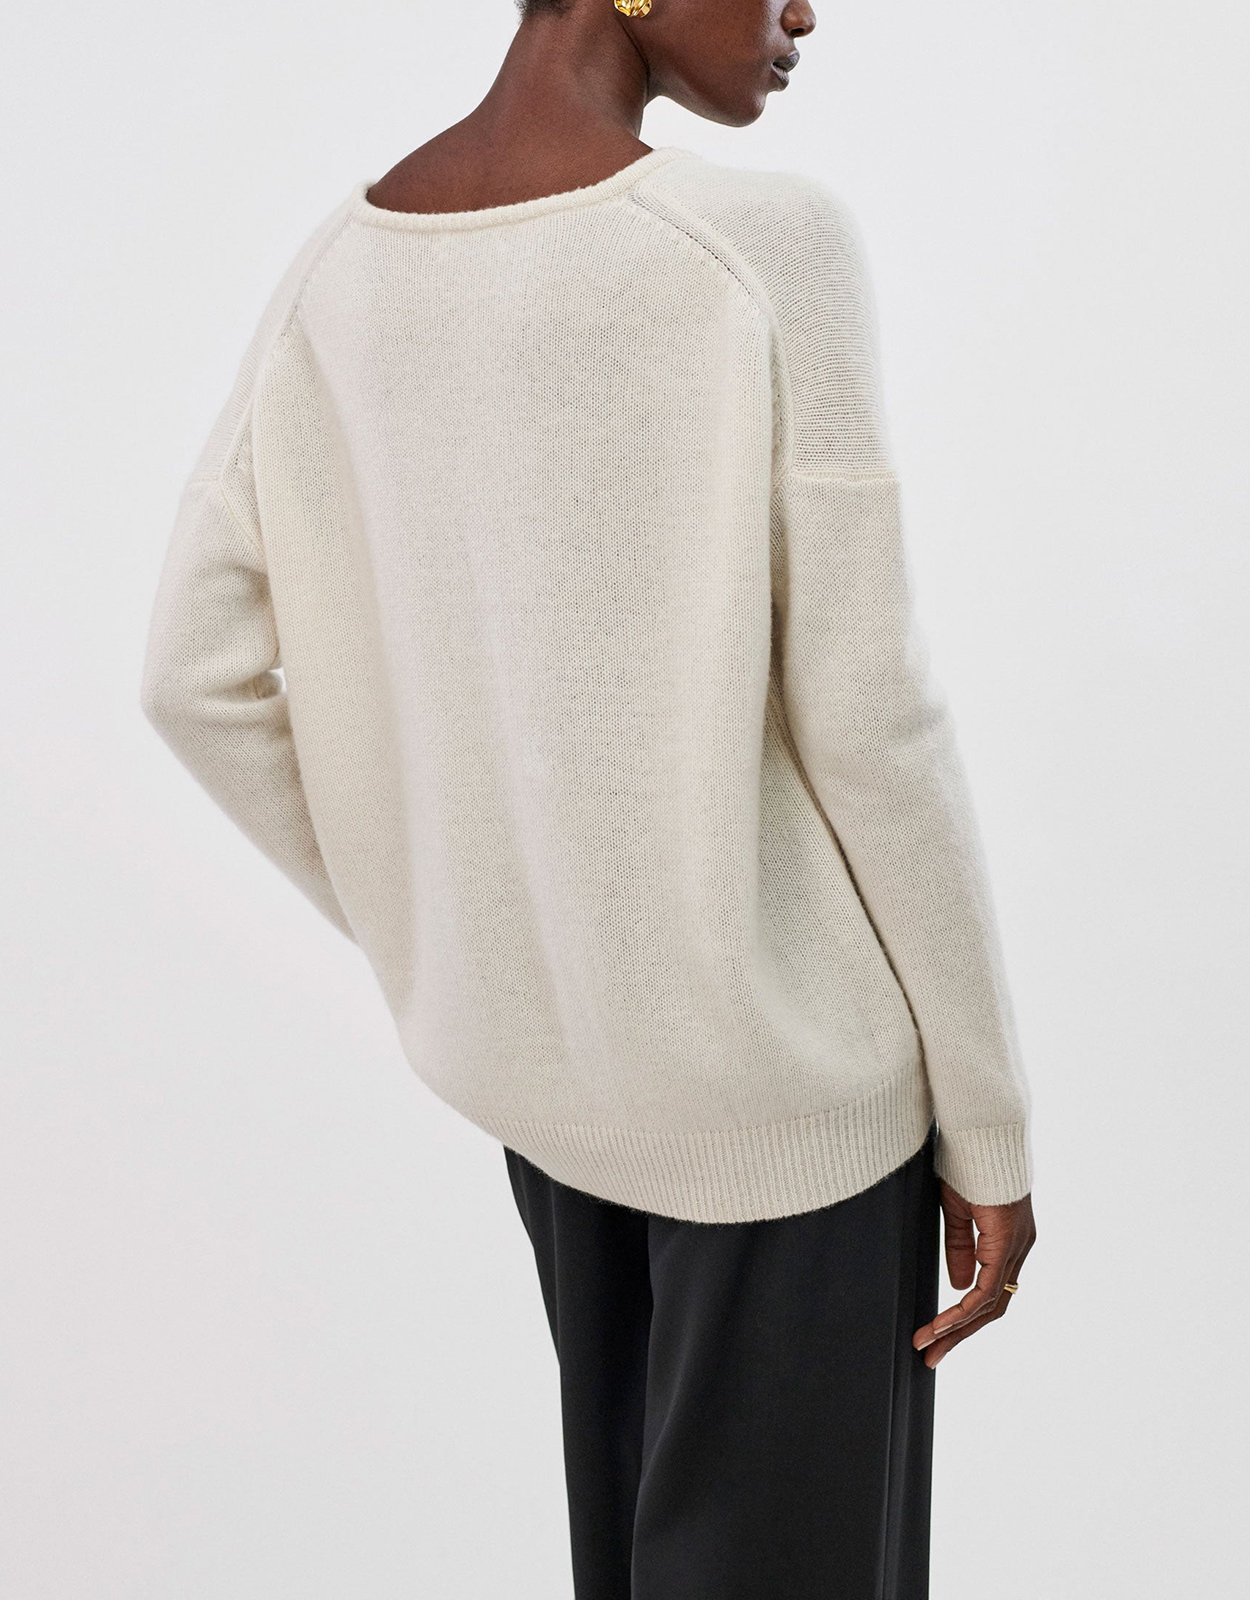 Co V-Neck Cashmere Sweater (Knitwear,Sweaters) IFCHIC.COM